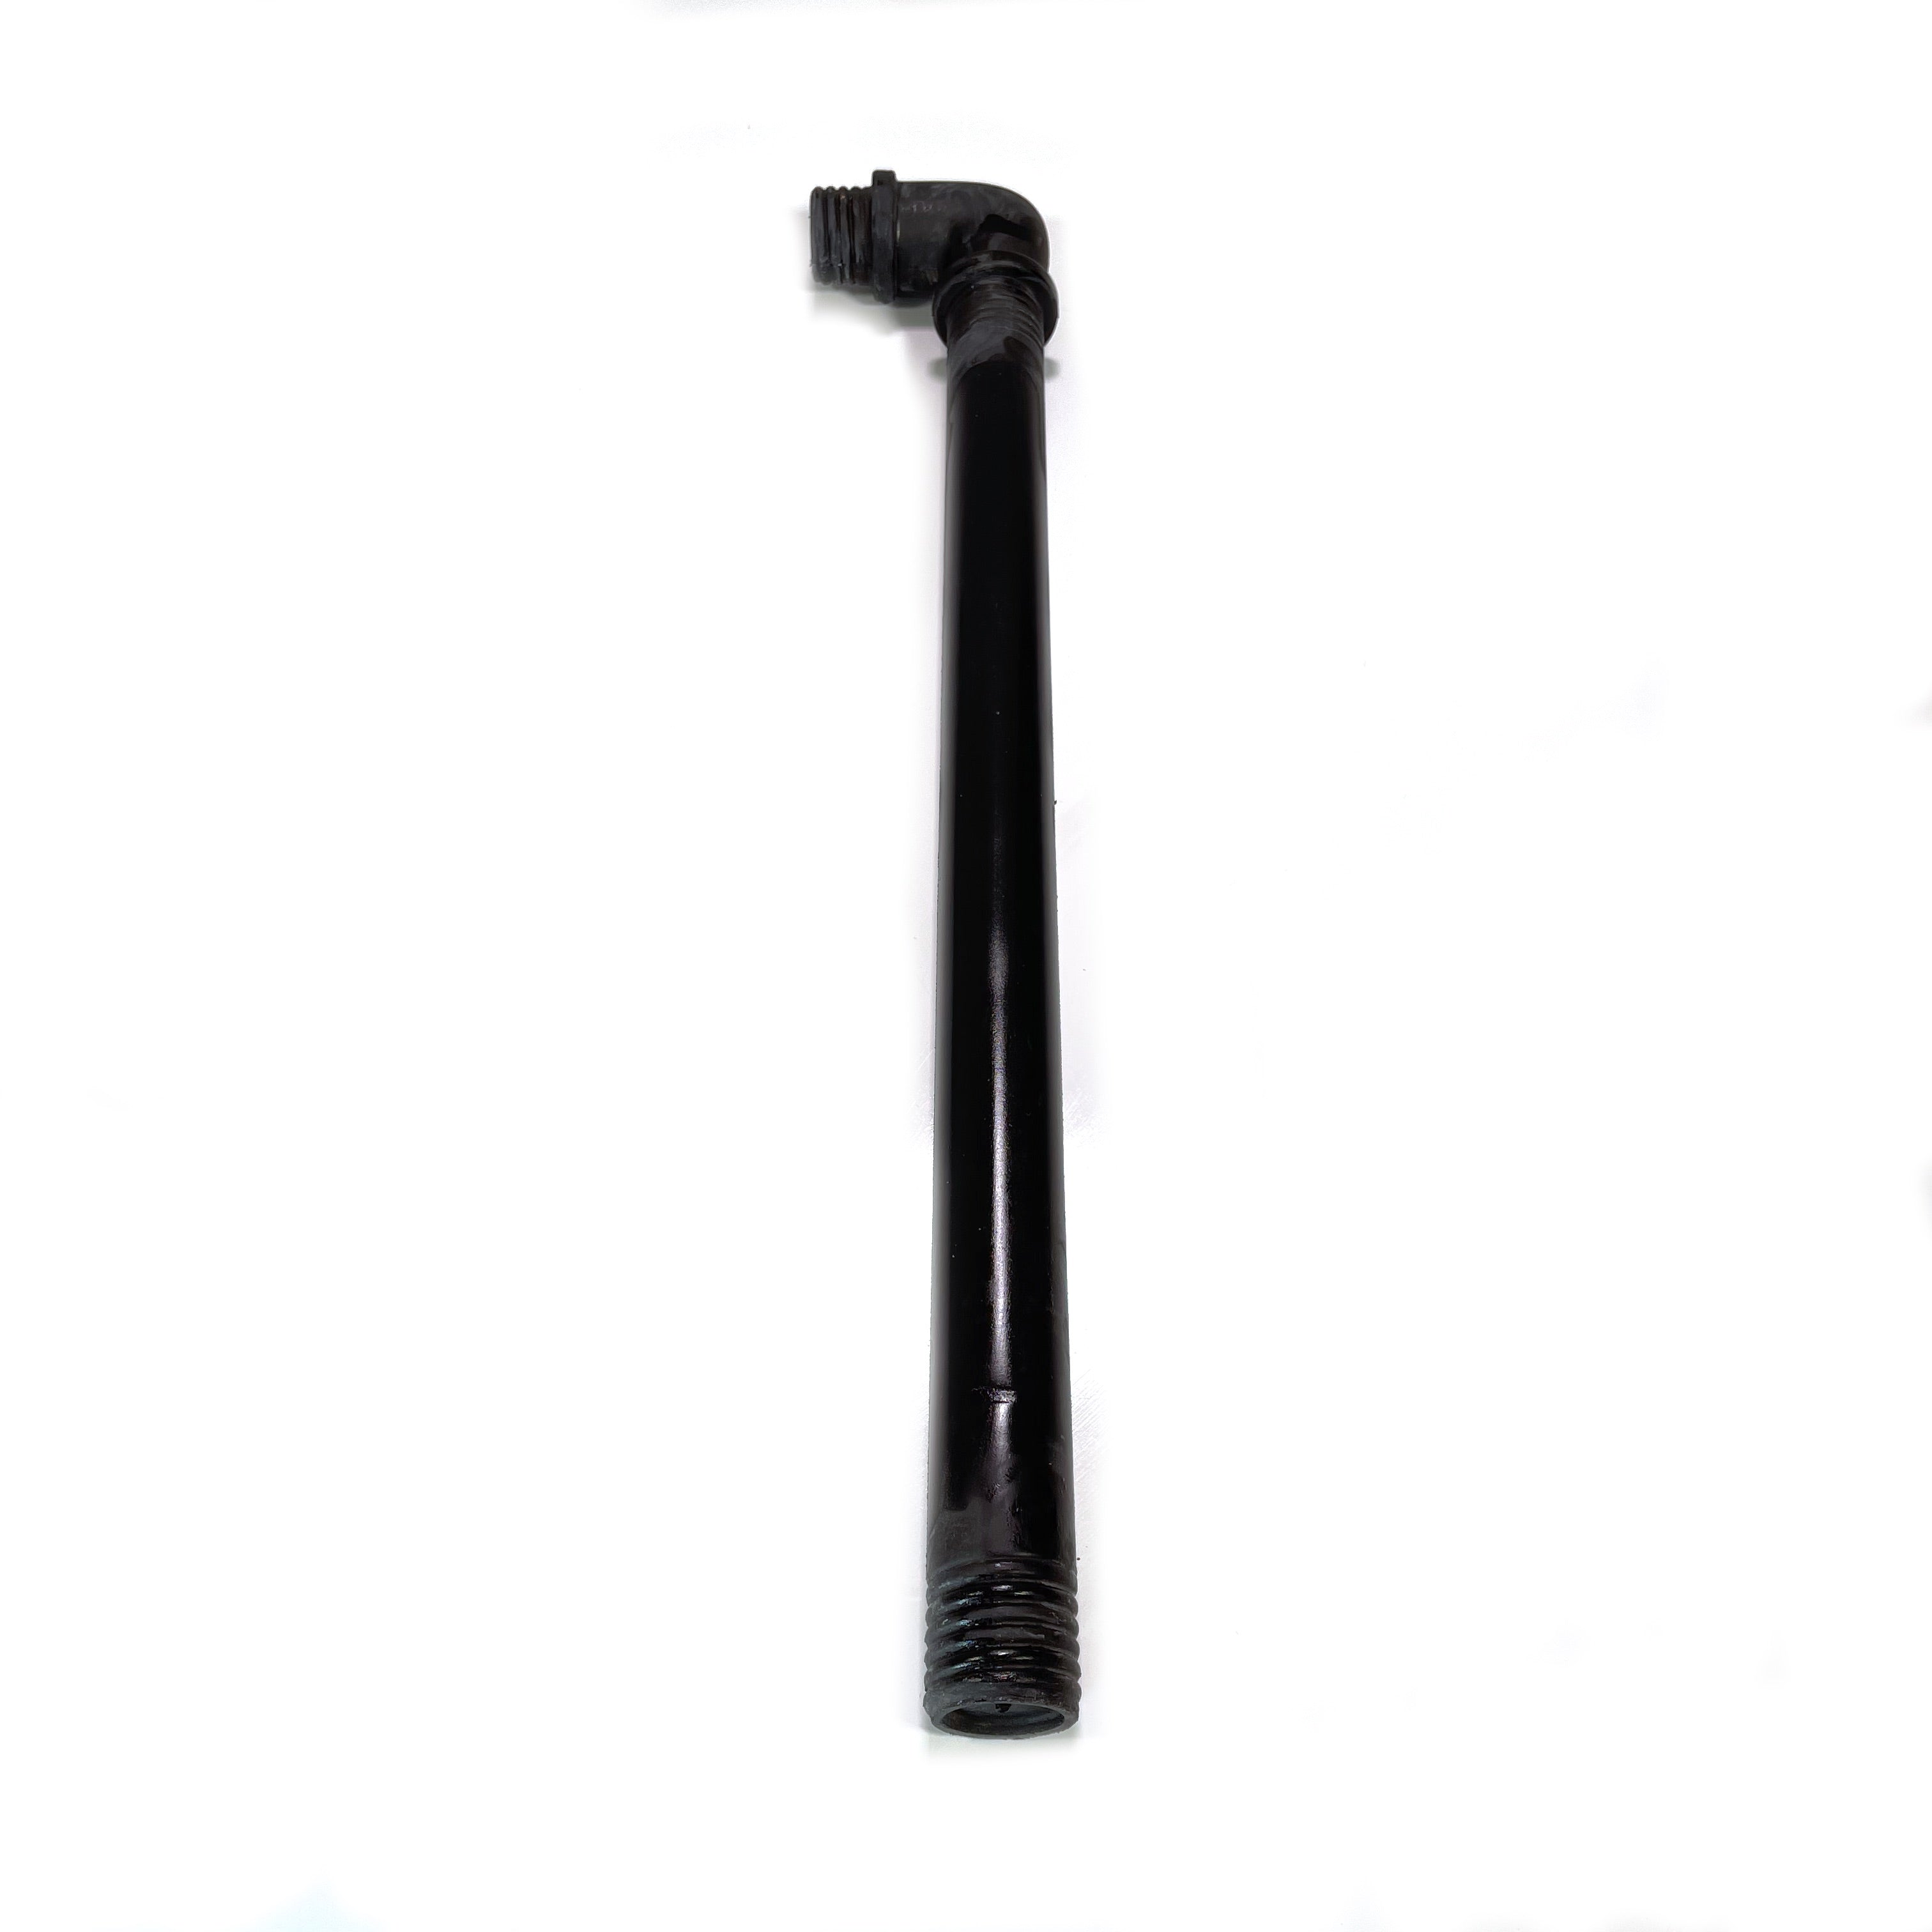 28 Inch Length Foam Rubber Lead Pipe with 90 degree Elbow - Black